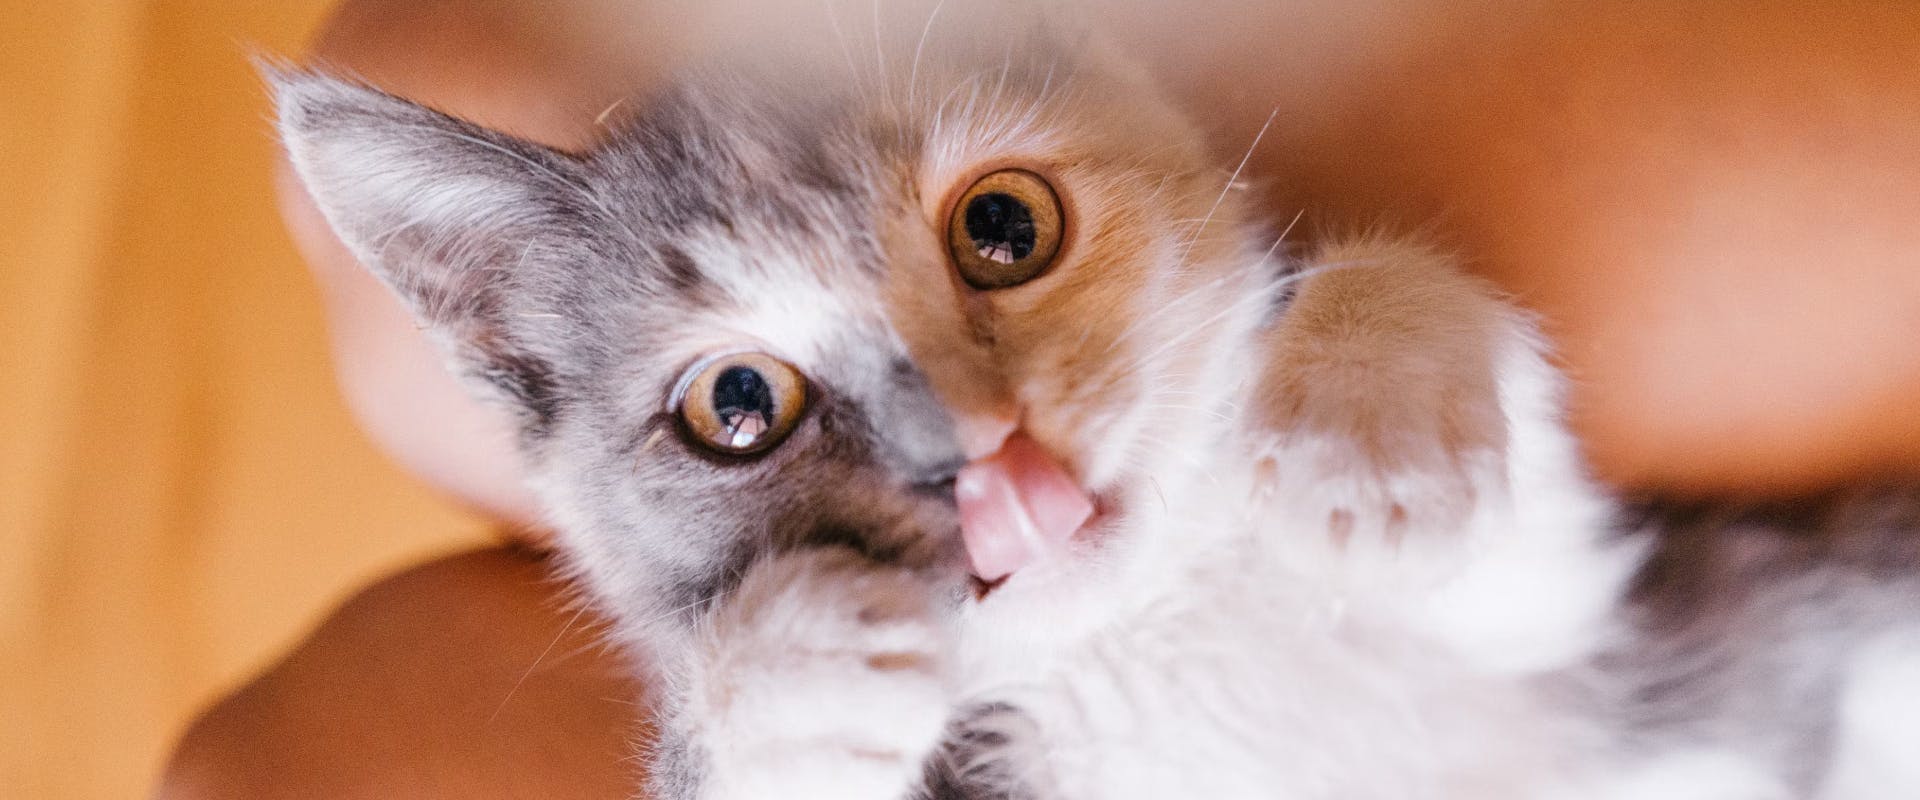 A kitten sticking their tongue out